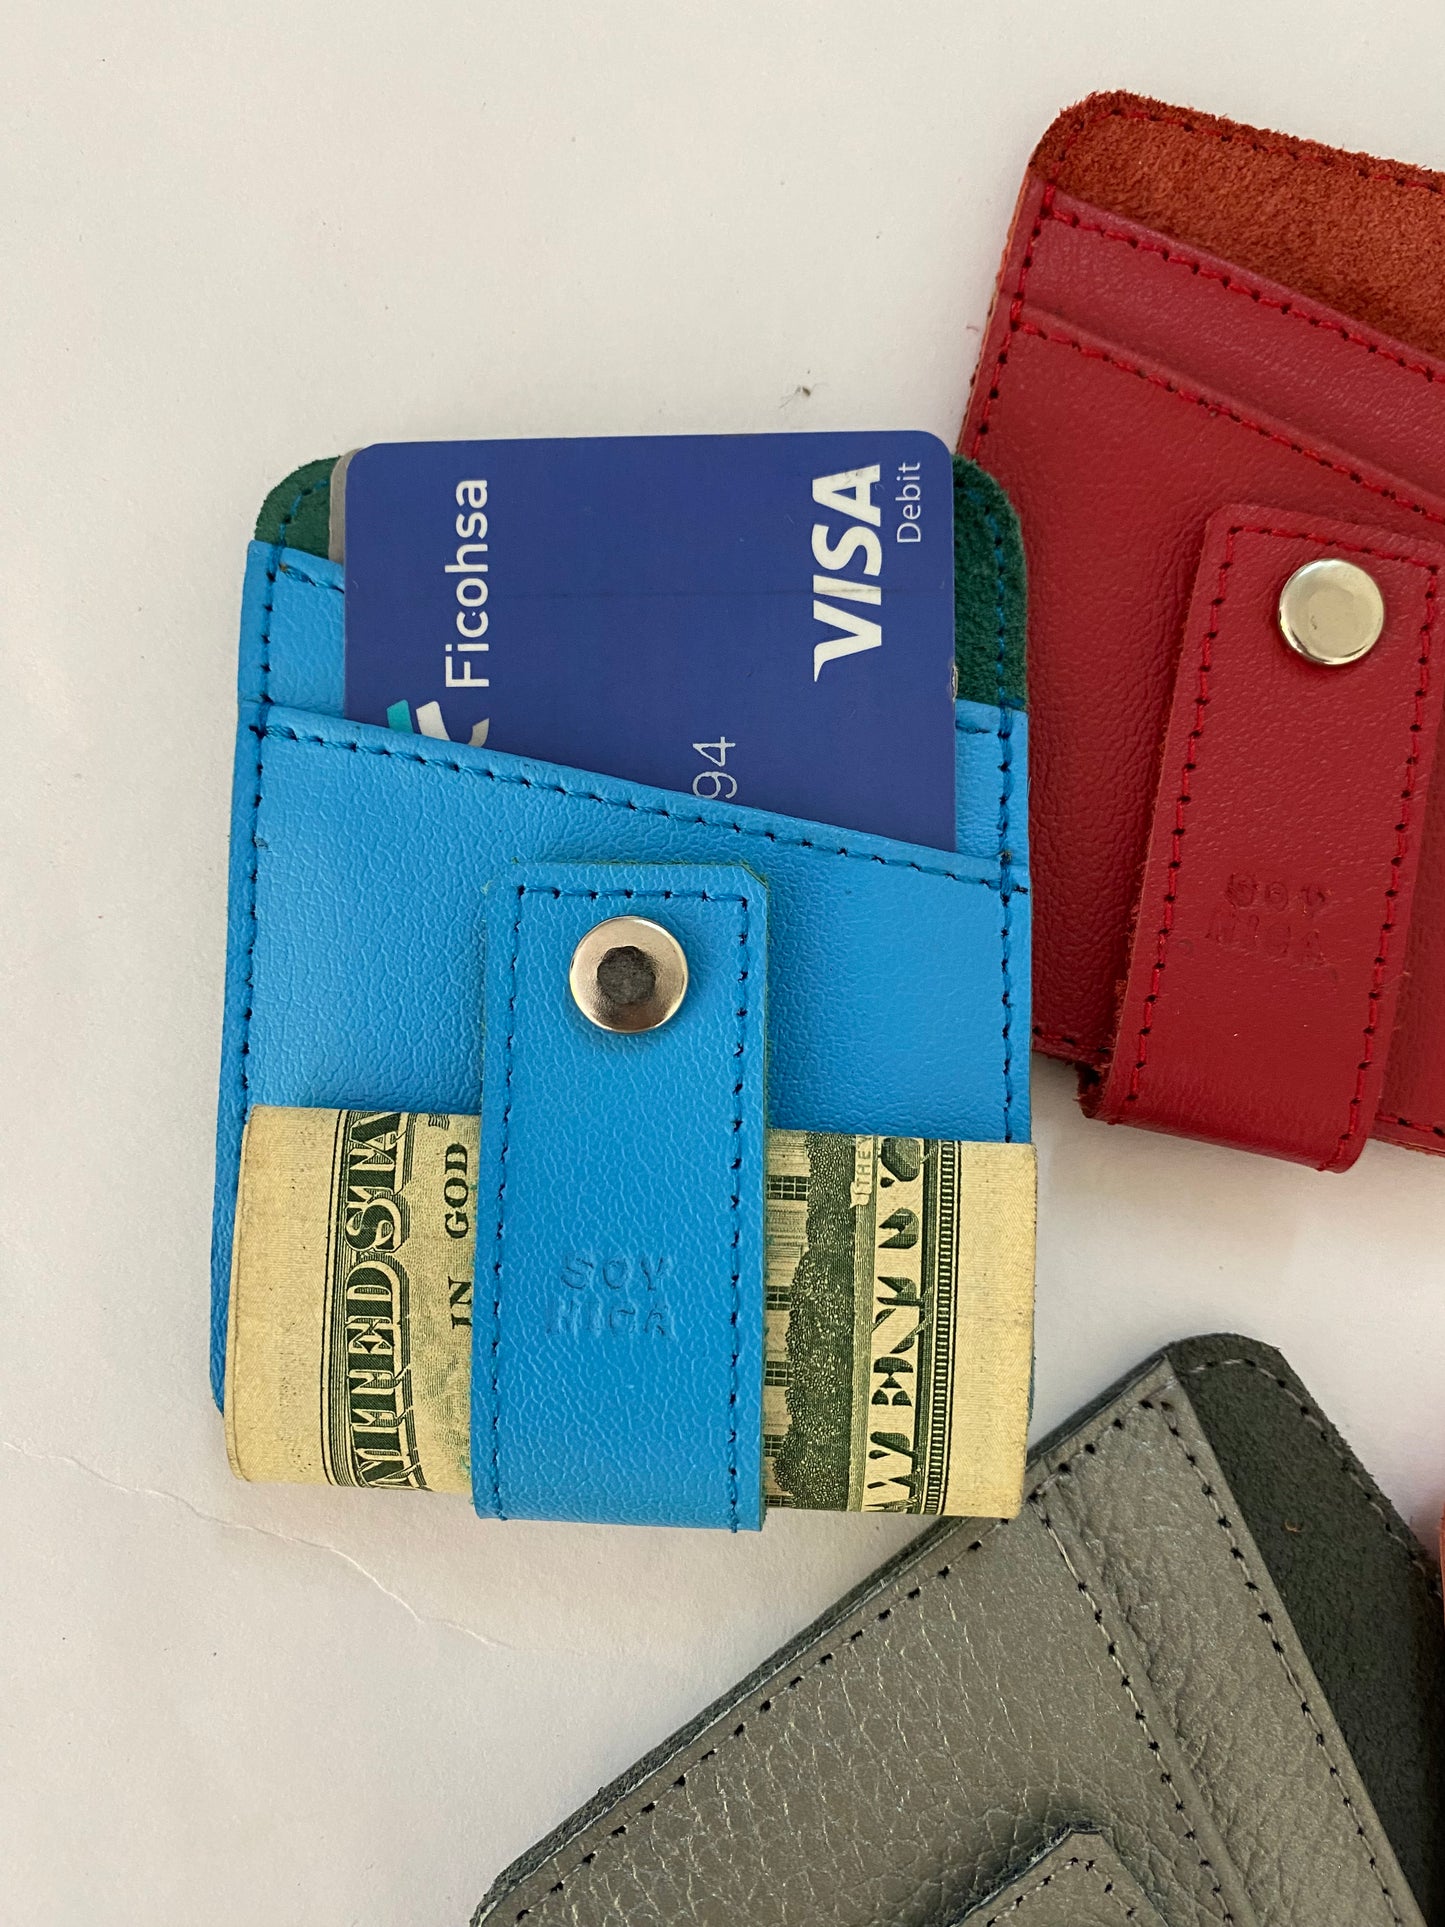 No. 439 Credit card and money holder